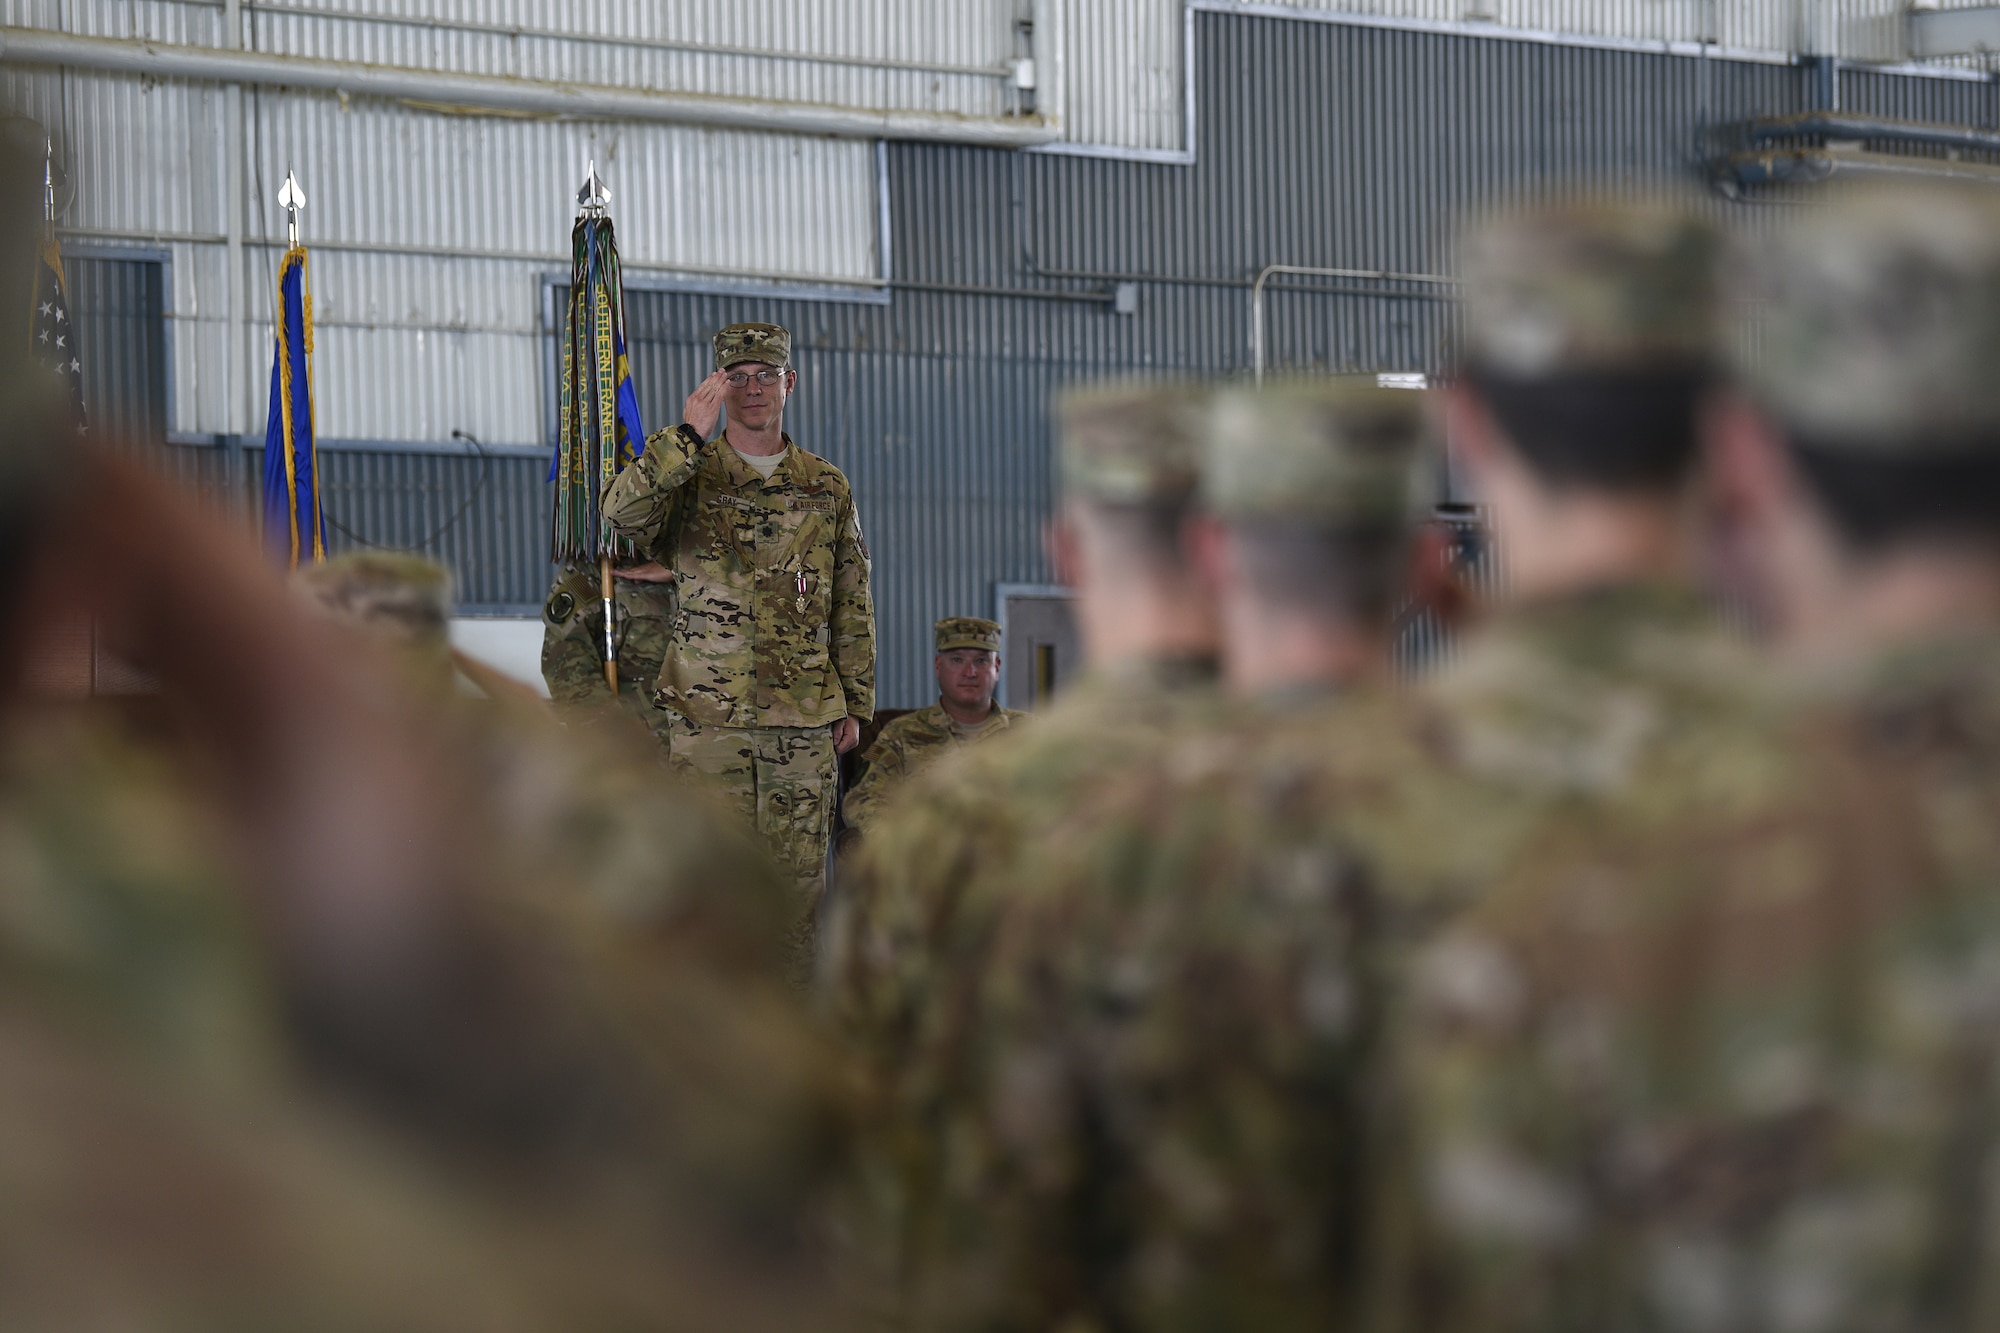 Lt. Col. Andrew Gray, former 512th Rescue Squadron commander, renders a final salute during the 512th RQS change of command ceremony at Kirtland Air Force Base, N.M., May 23, 2019. The mission of the 512 RQS is to prepare mission-ready aircrew for personnel recovery, nuclear enterprise security and support, and distinguished visitor airlift at operational units across the Air Force. (U.S. Air Force photo by Airman 1st Class Austin J. Prisbrey)